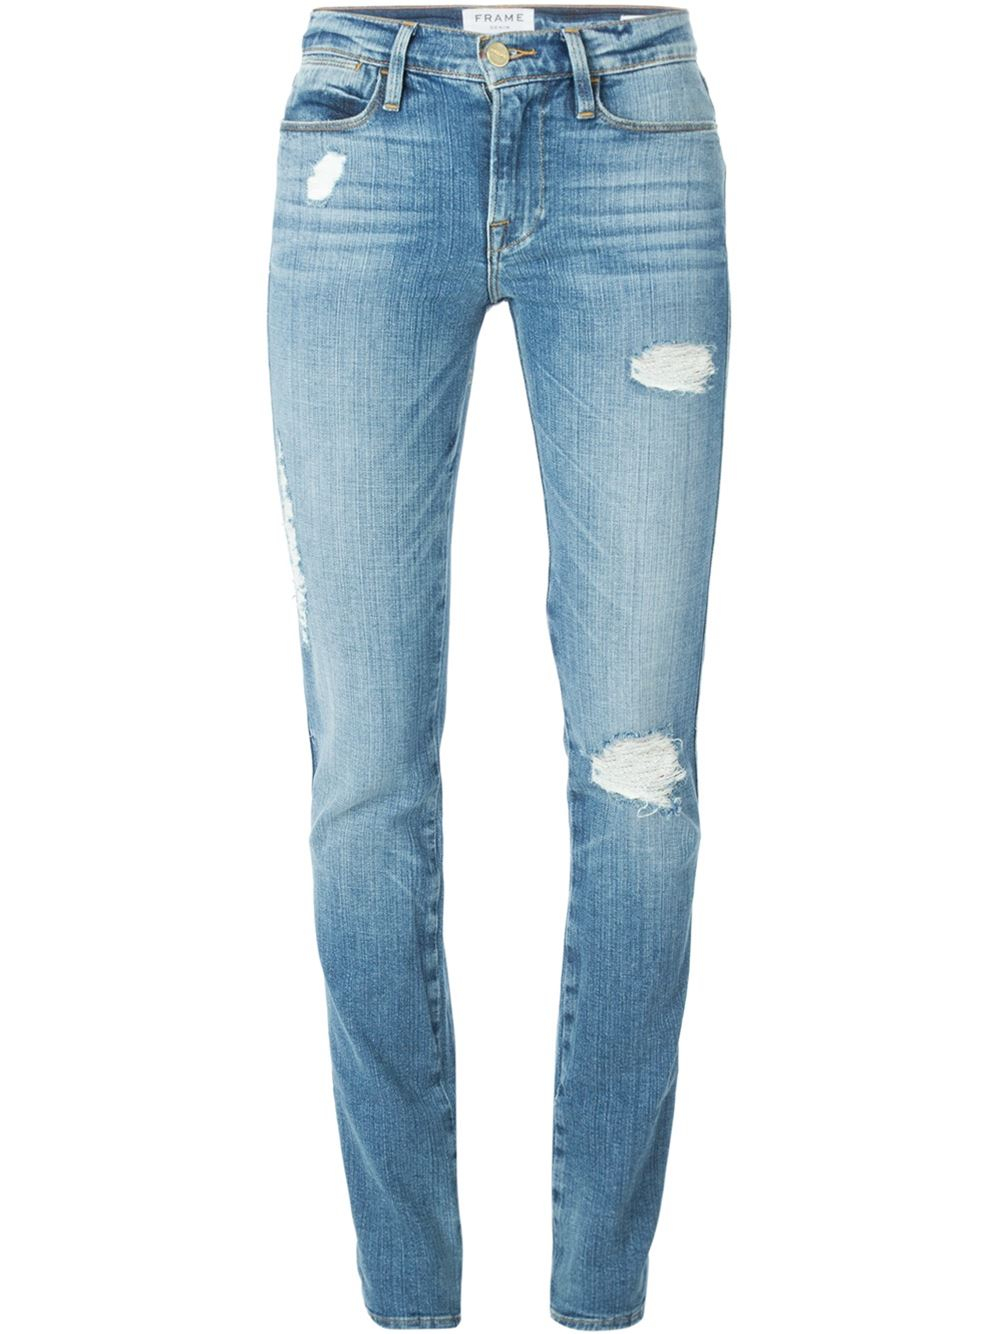 Frame High Waist Distressed Jeans in Blue | Lyst